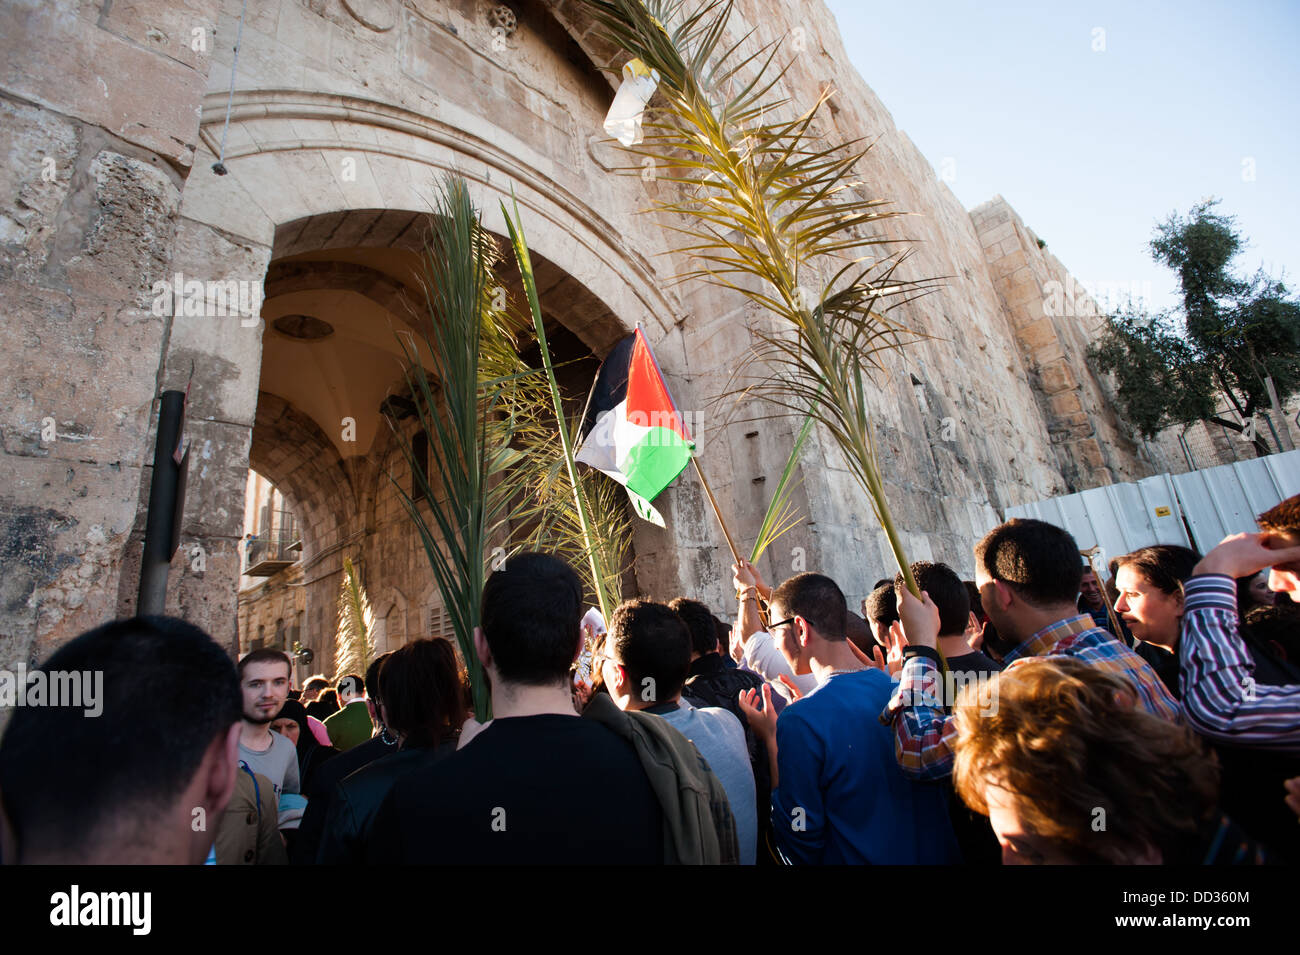 Christian pilgrims enter the Lions' Gate of the Old City of Jerusalem in the annual Palm Sunday procession. Stock Photo